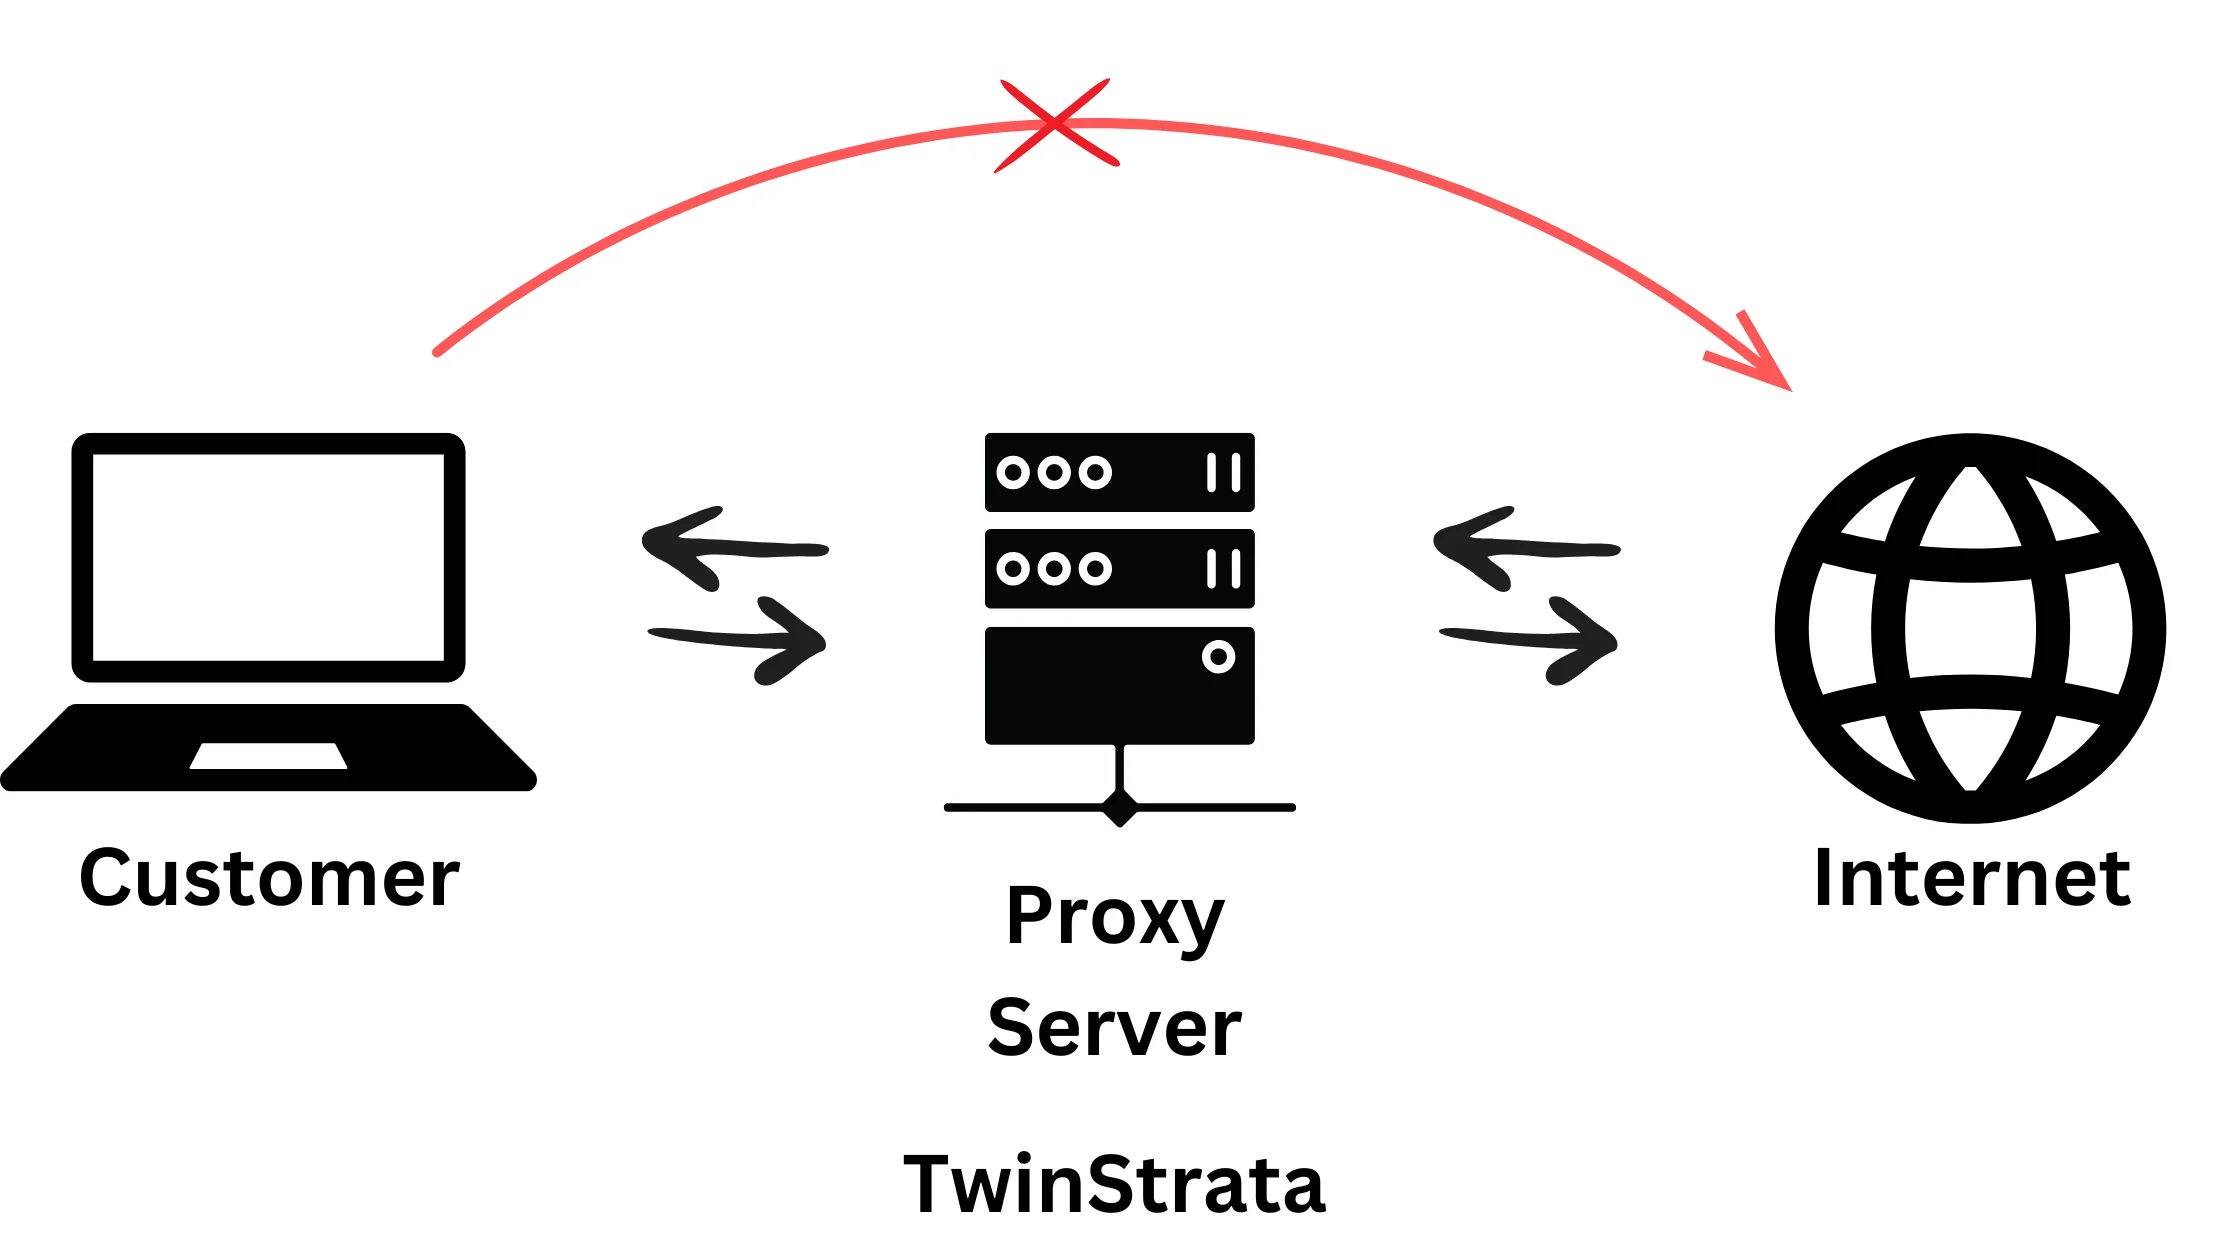 what is proxy server?